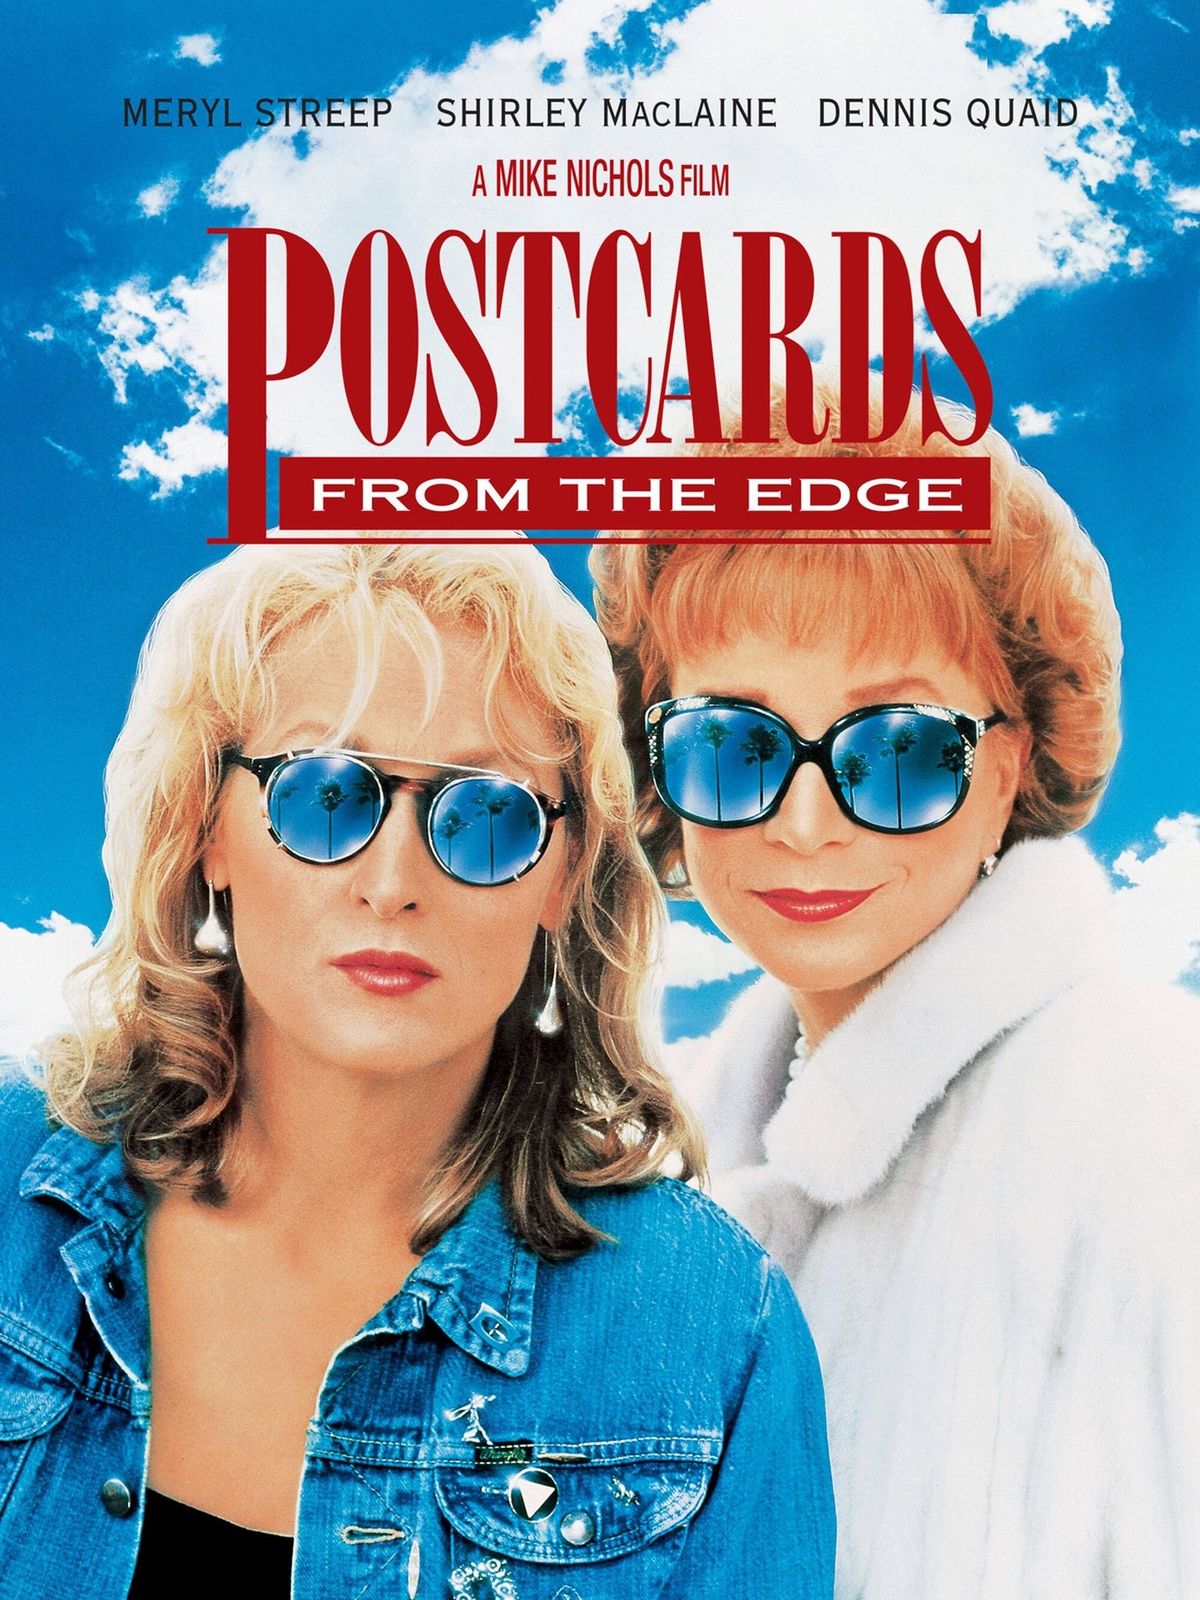 $1 Movie Night: Postcards from the Edge (1990)